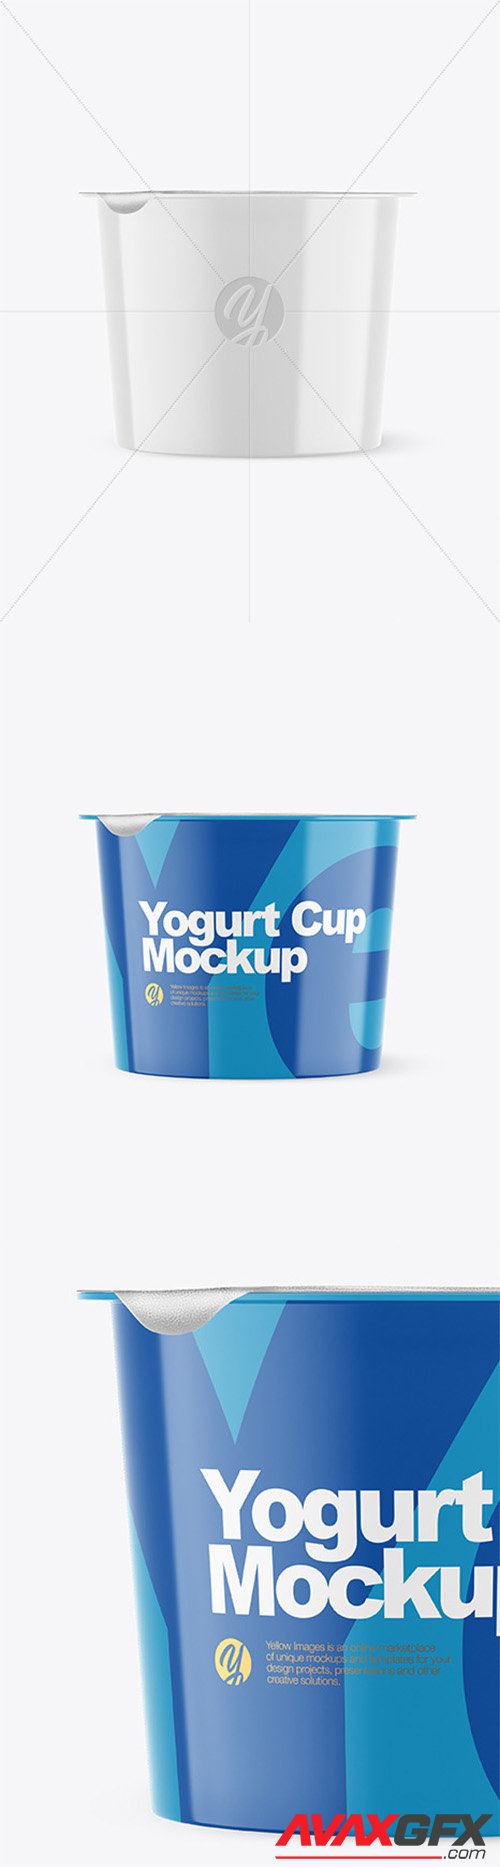 Download Glossy Plastic Yogurt Cup With Foil Lid Mockup Front View 66253 Avaxgfx All Downloads That You Need In One Place Graphic From Nitroflare Rapidgator